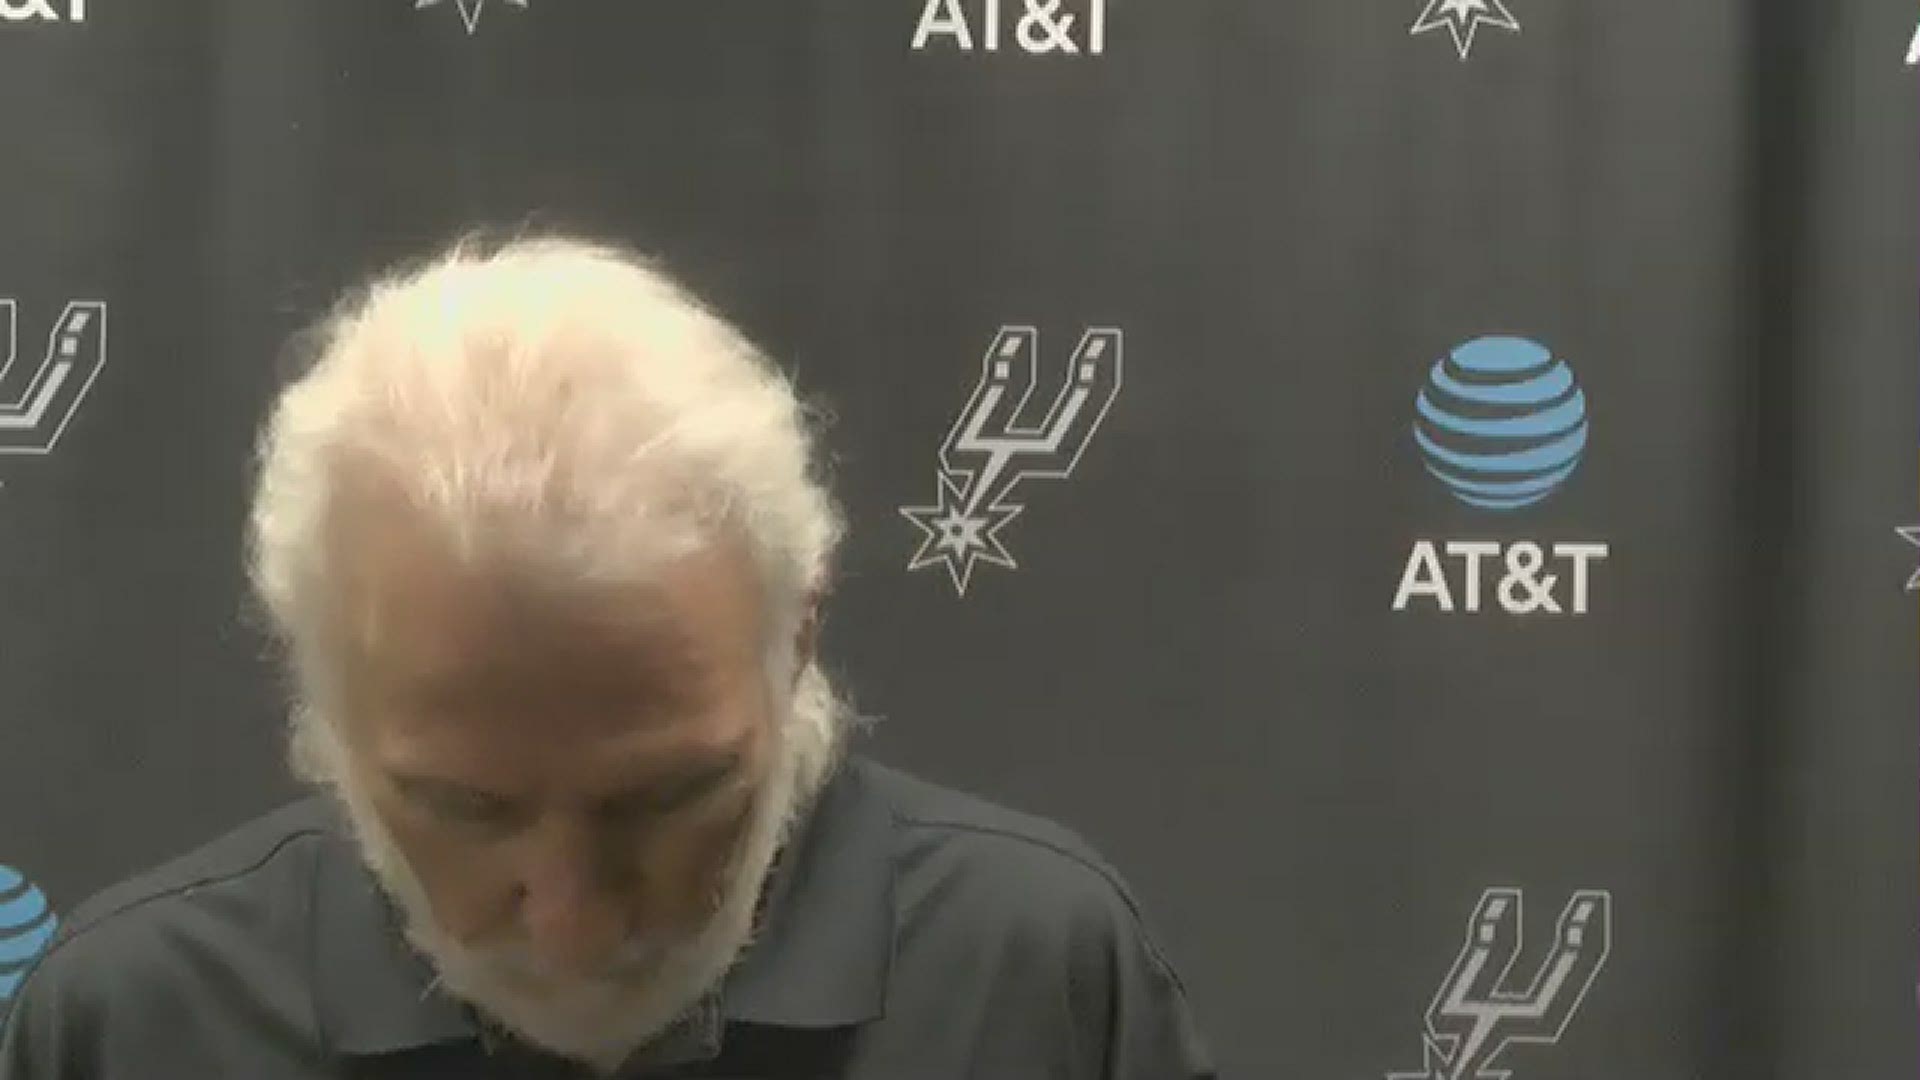 Popovich spoke about DeRozan showing now rust in his stellar return, Aldridge being a steady presence in his new bench role, Lyles, and the guards.